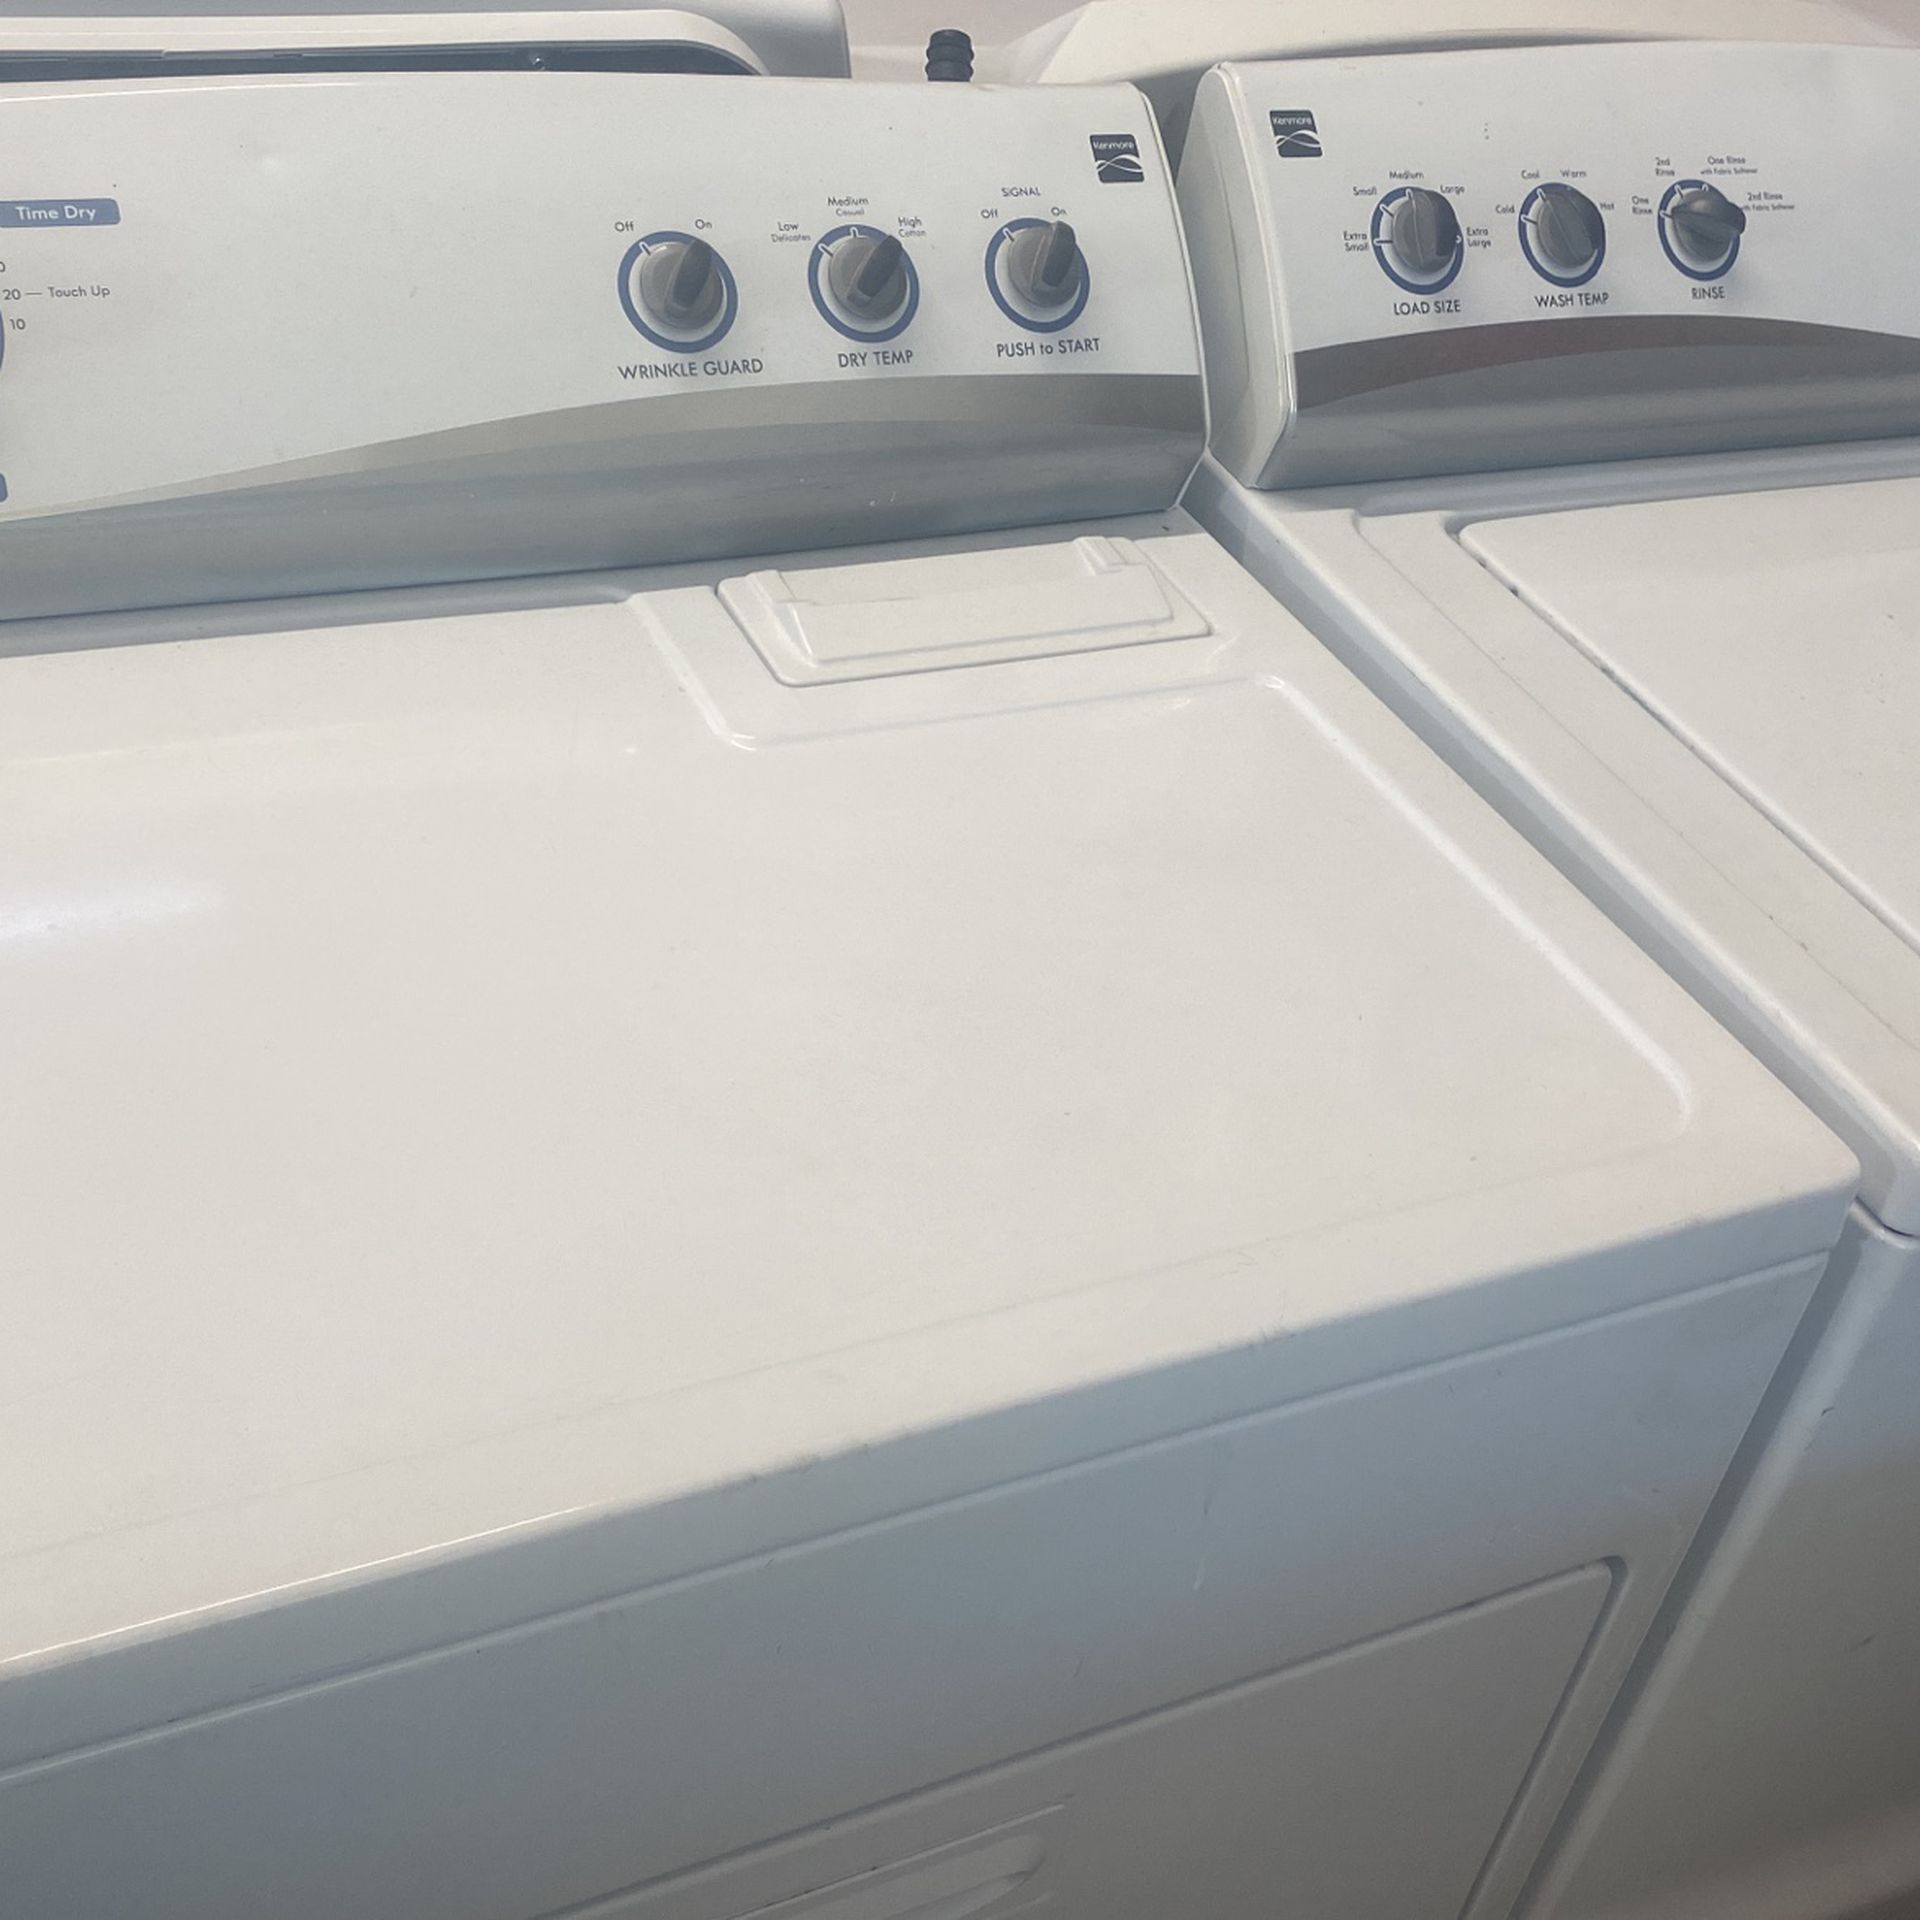 Set Kenmore Washer And Dryer 